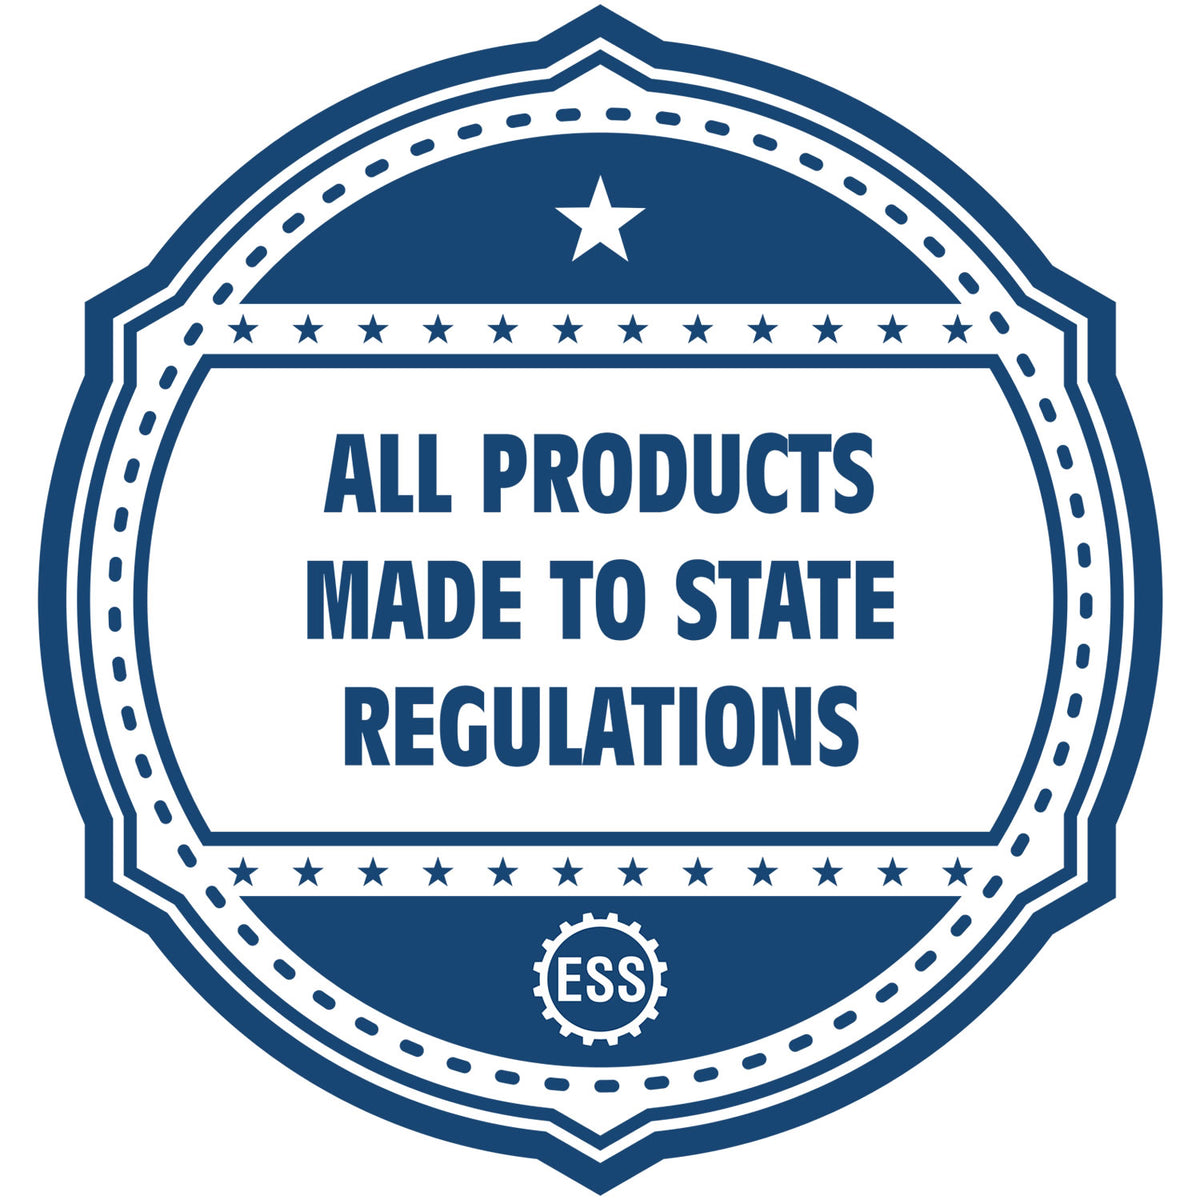 An icon or badge element for the Extended Long Reach Mississippi Architect Seal Embosser showing that this product is made in compliance with state regulations.